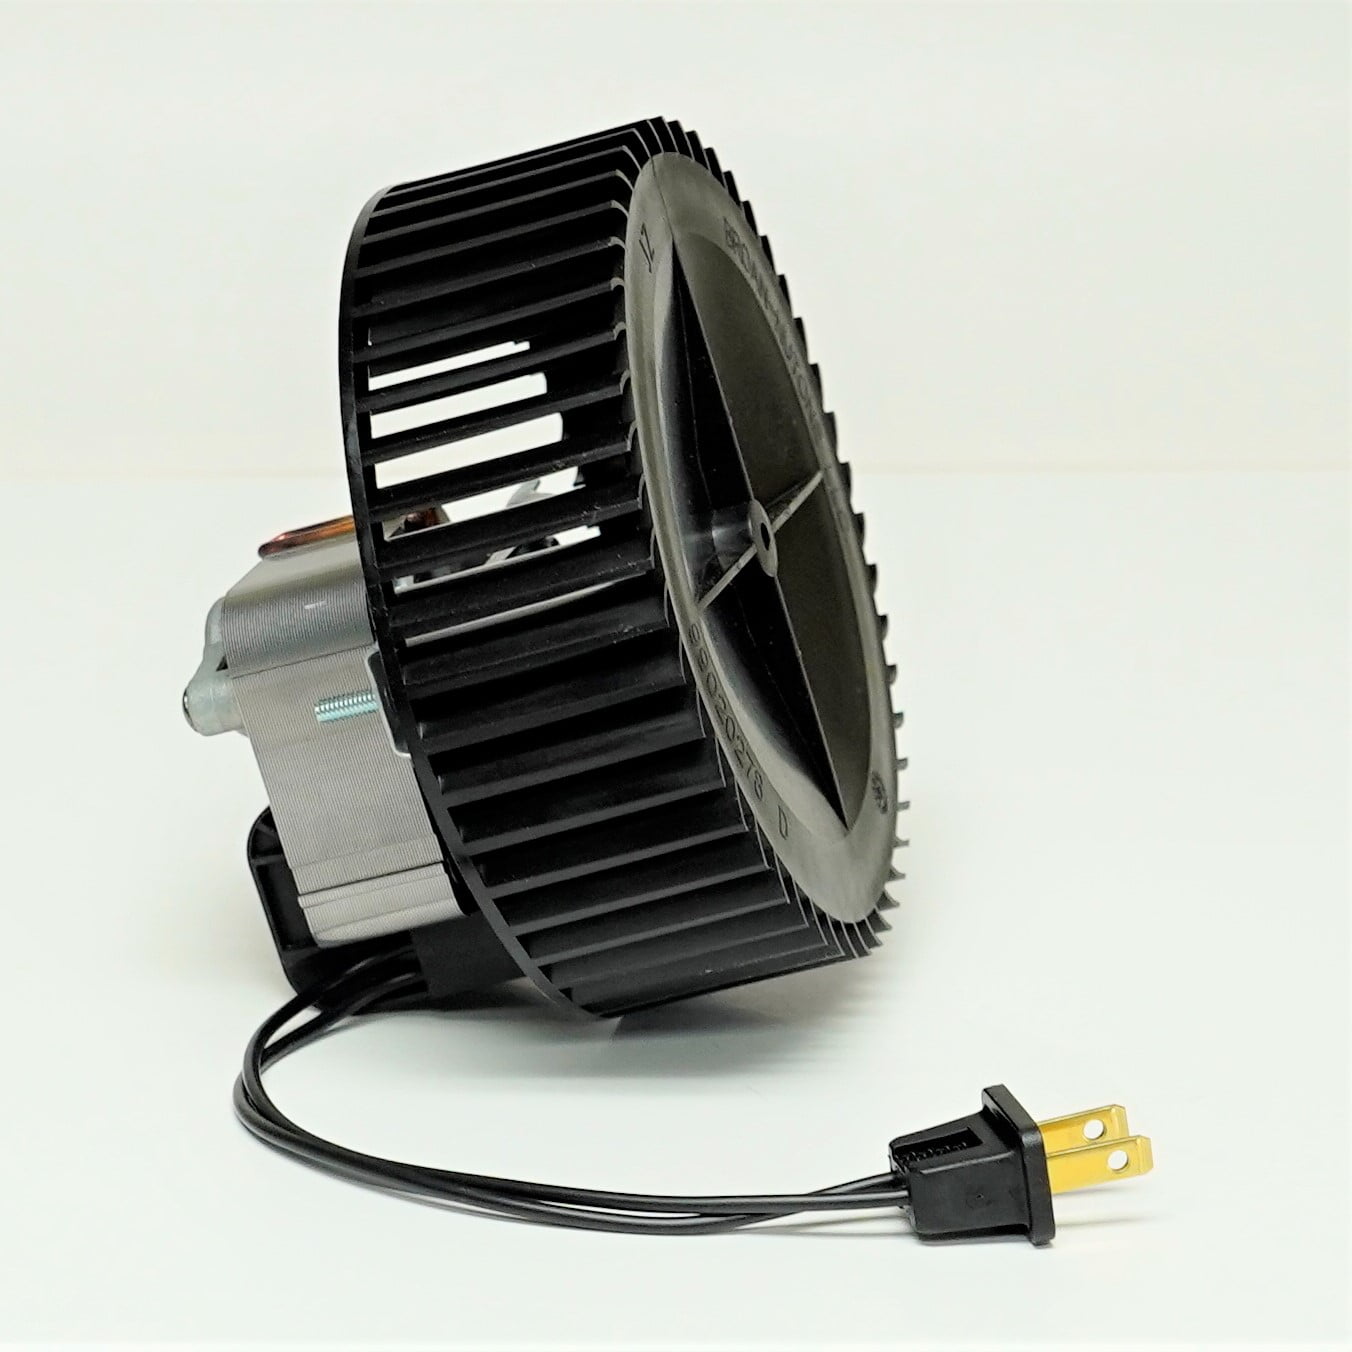 Broan 690NT Replacement 115V Vent Fan Motor # 97018812 